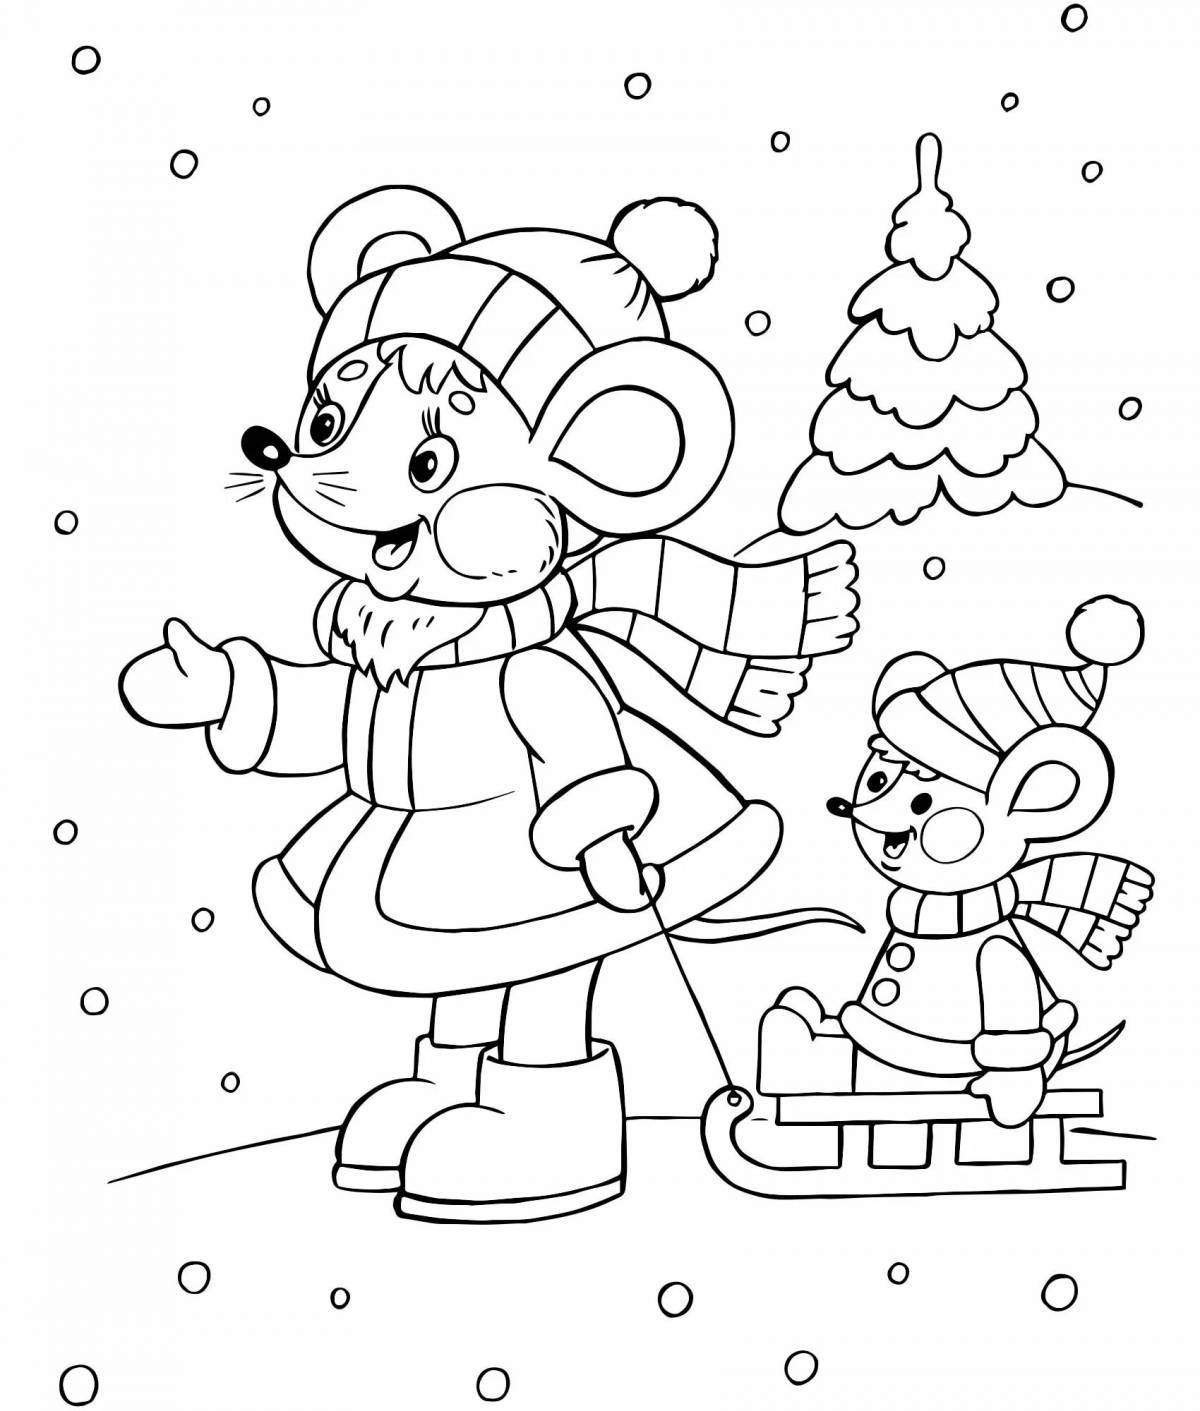 Dazzling winter coloring book for 3 year olds